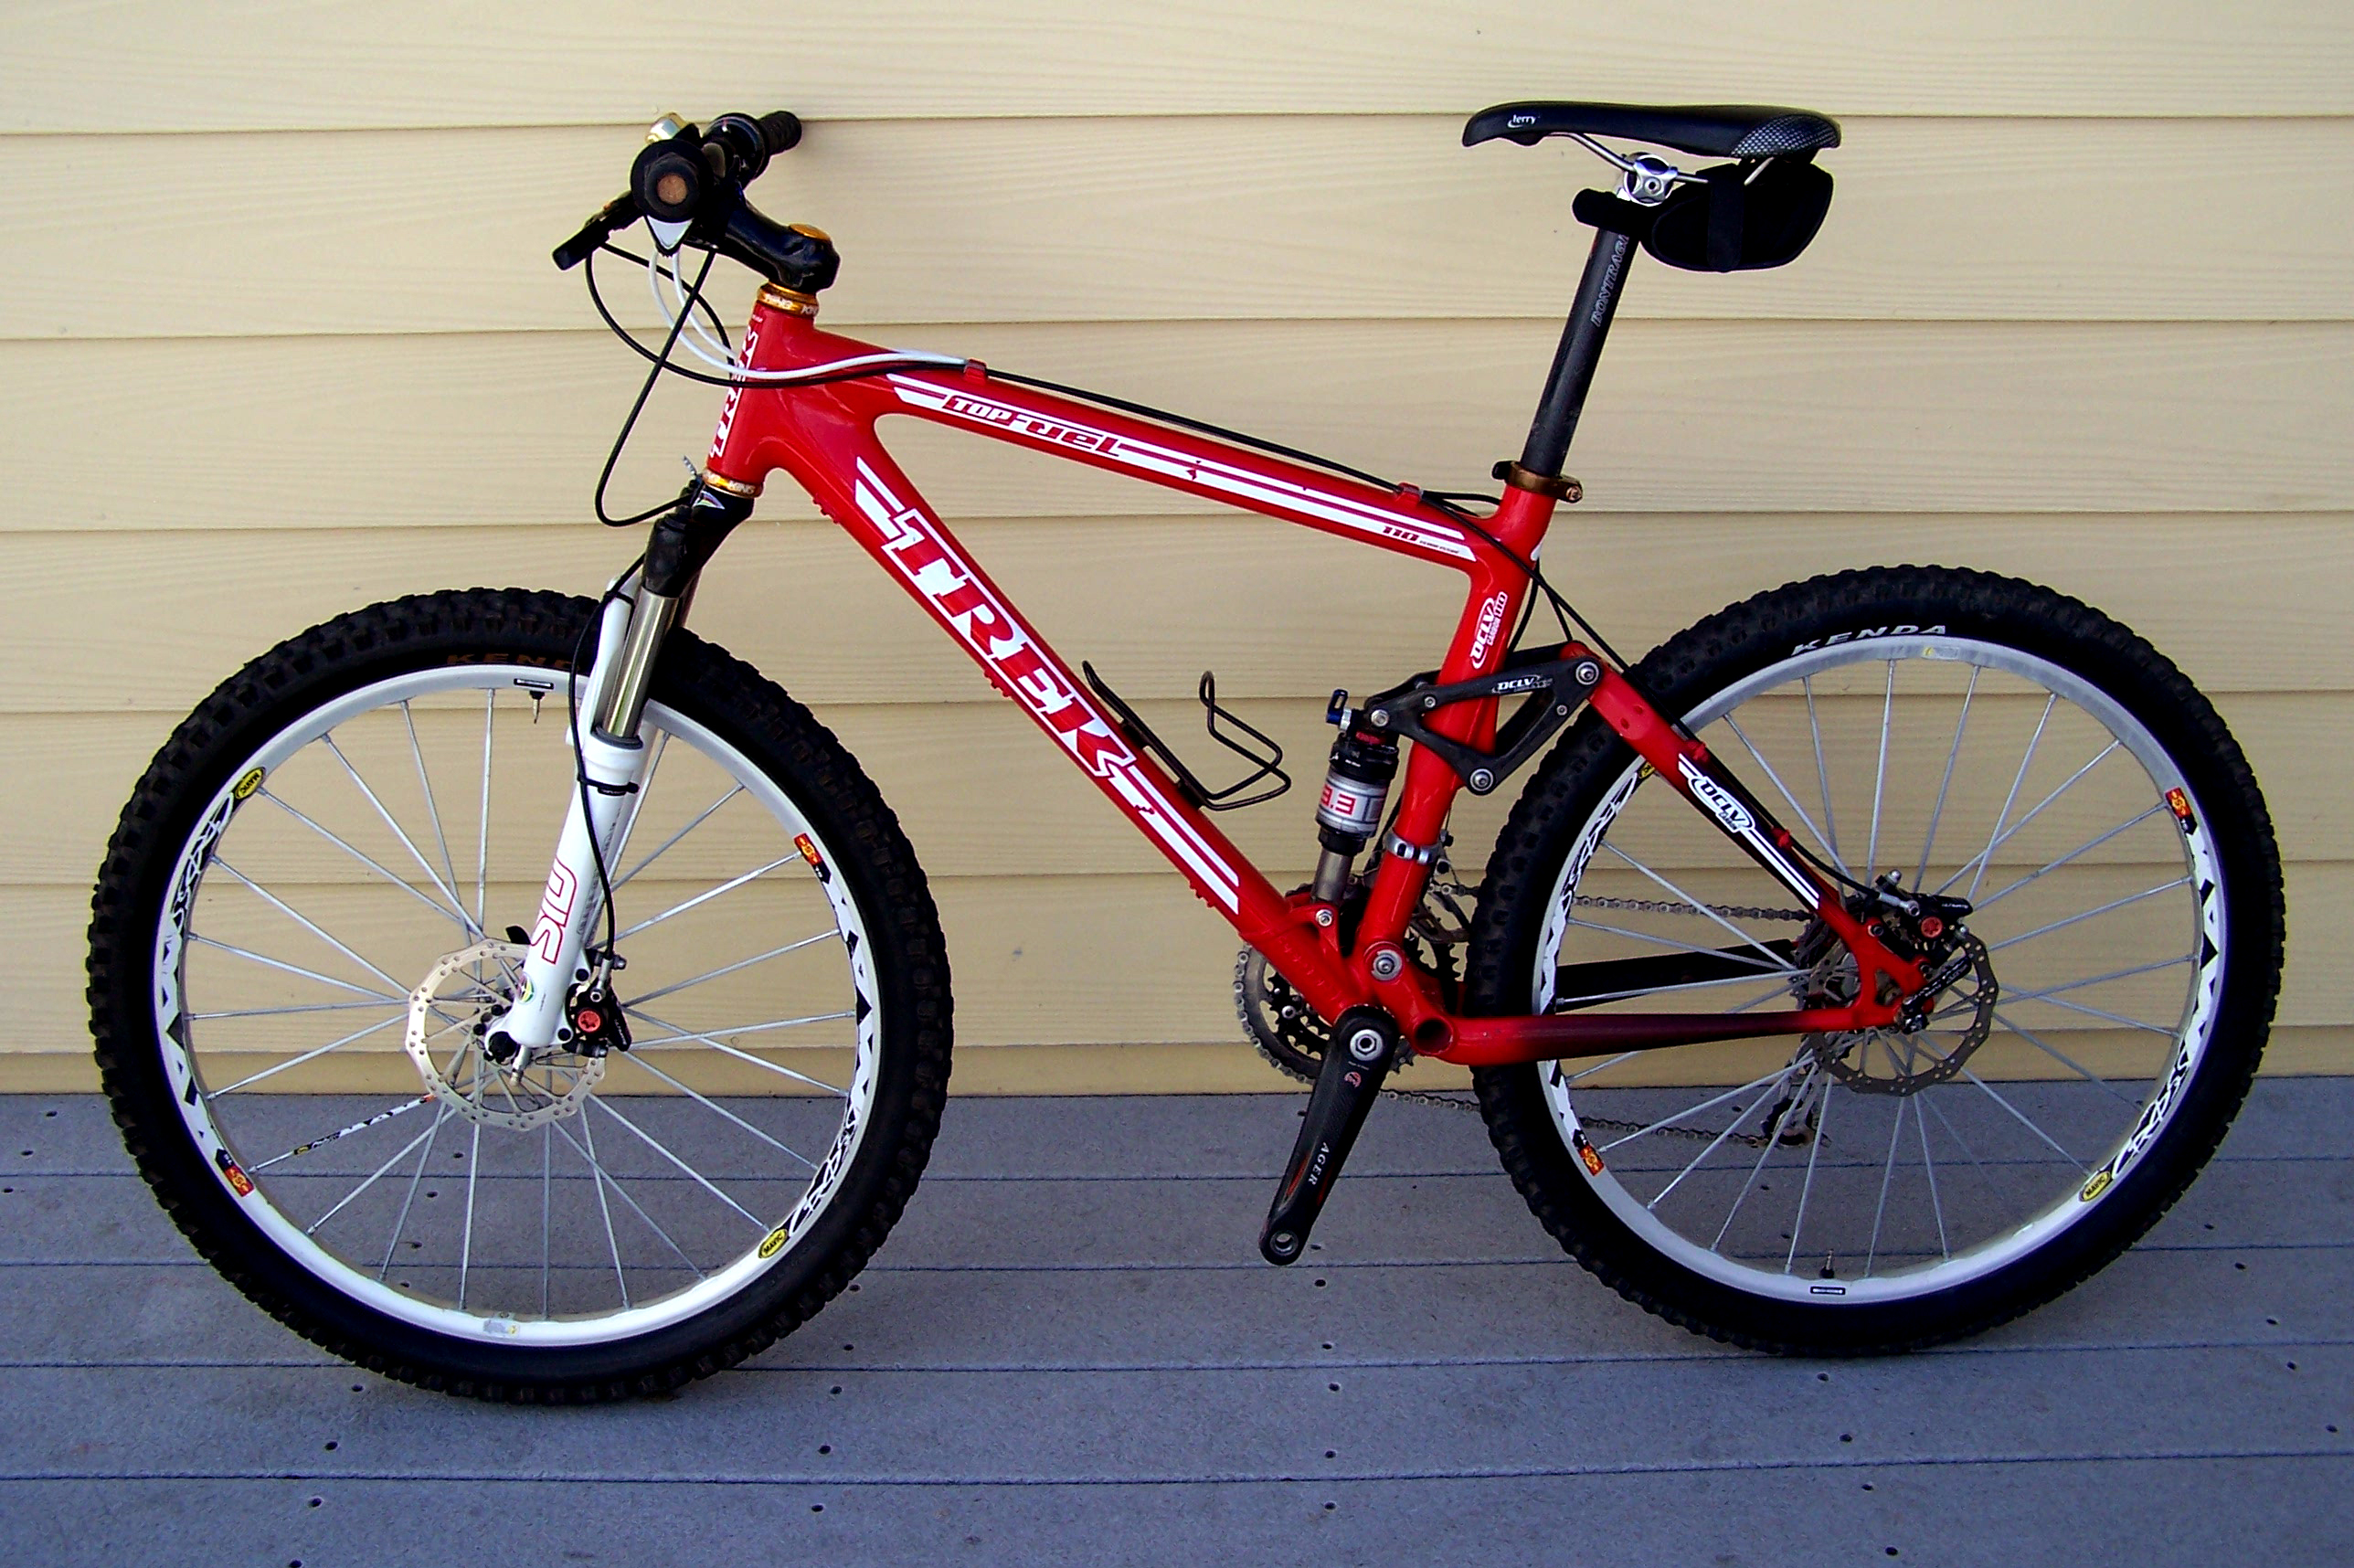 trek cycles for sale